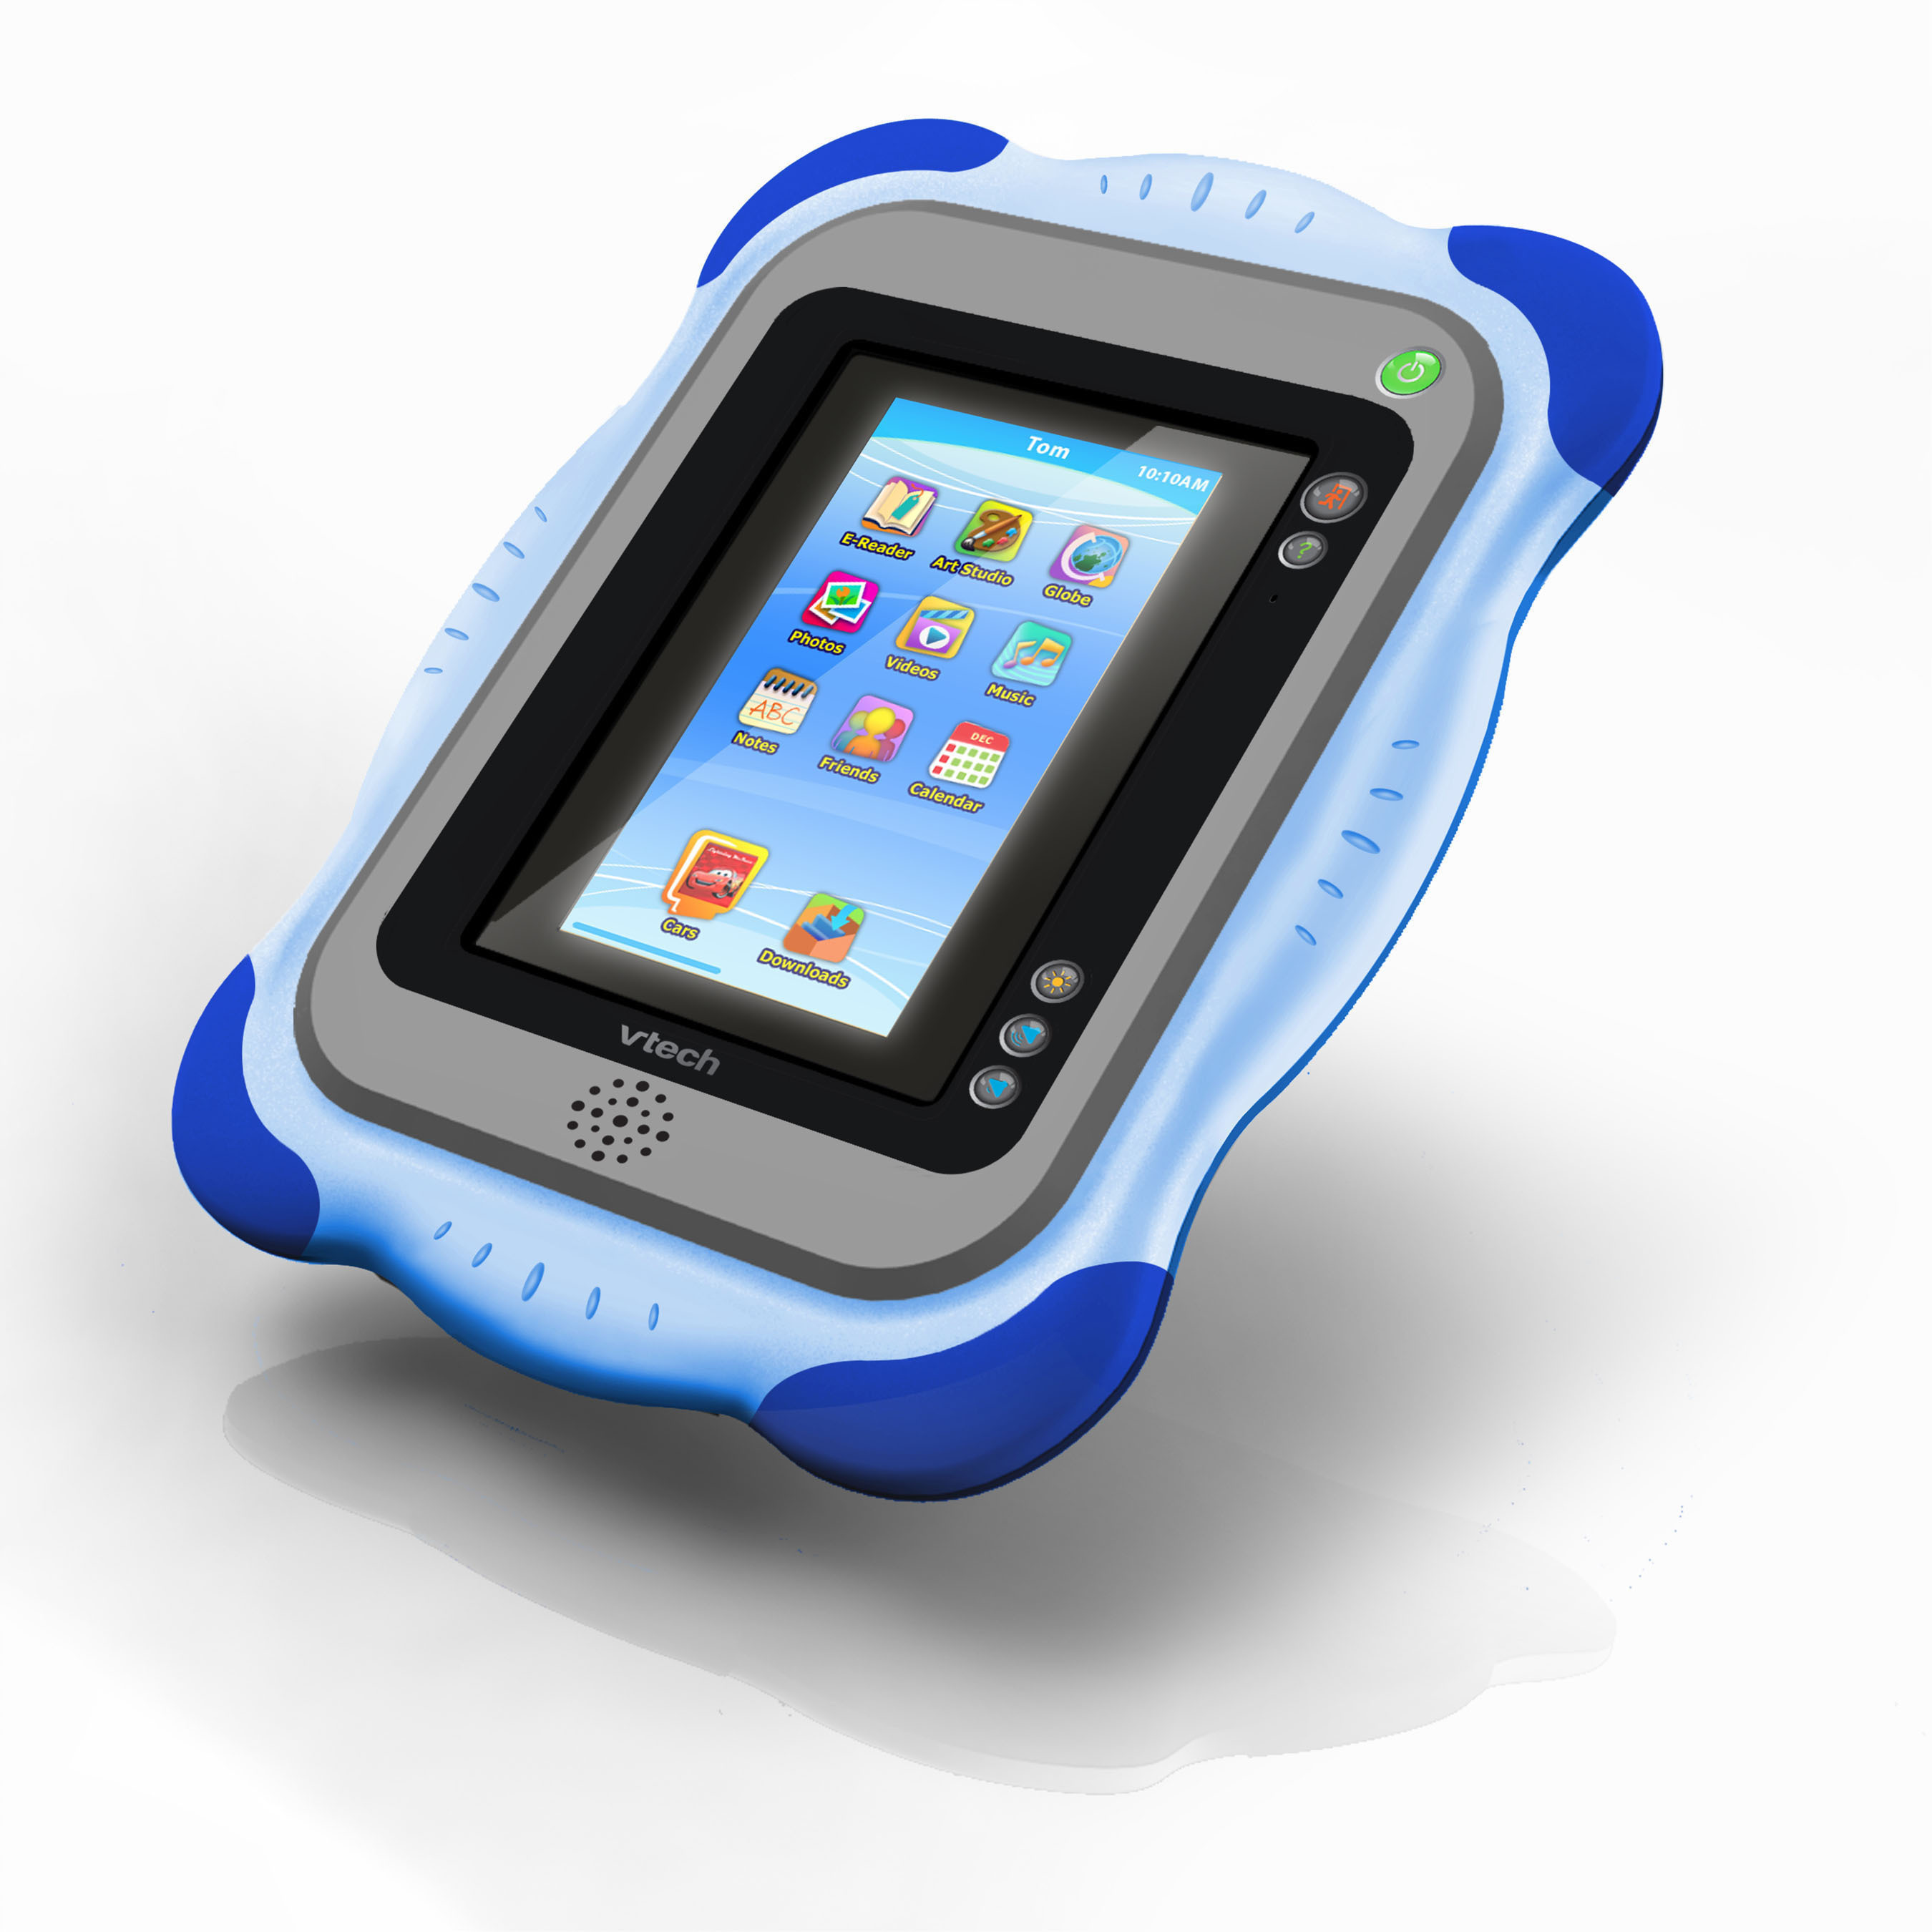 VTech, global leader in educational toys and cordless phones